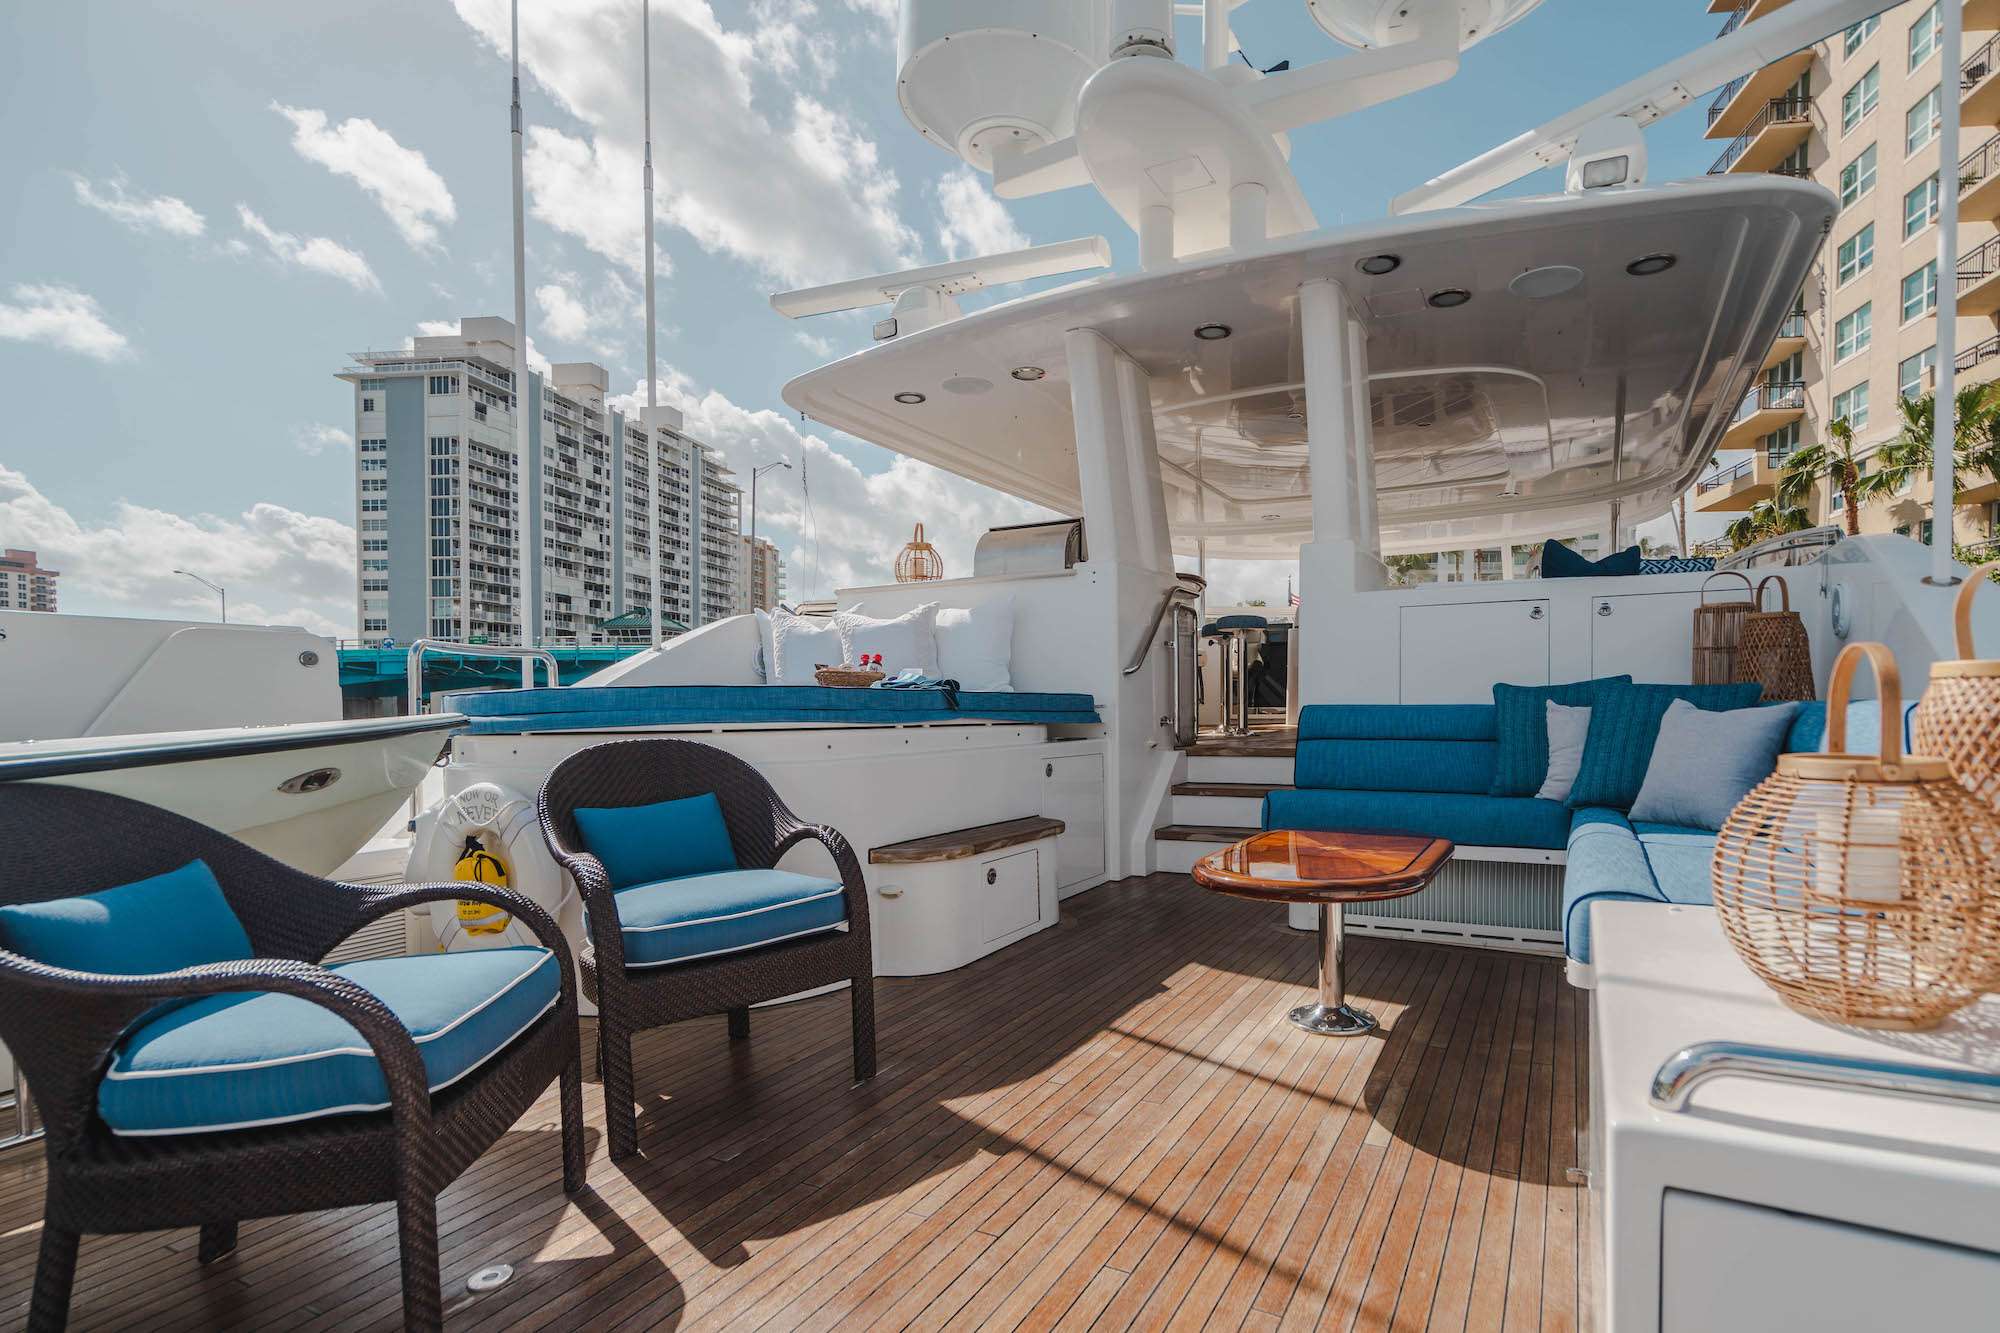 NOW OR NEVER Yacht Charter - Flybridge Seating